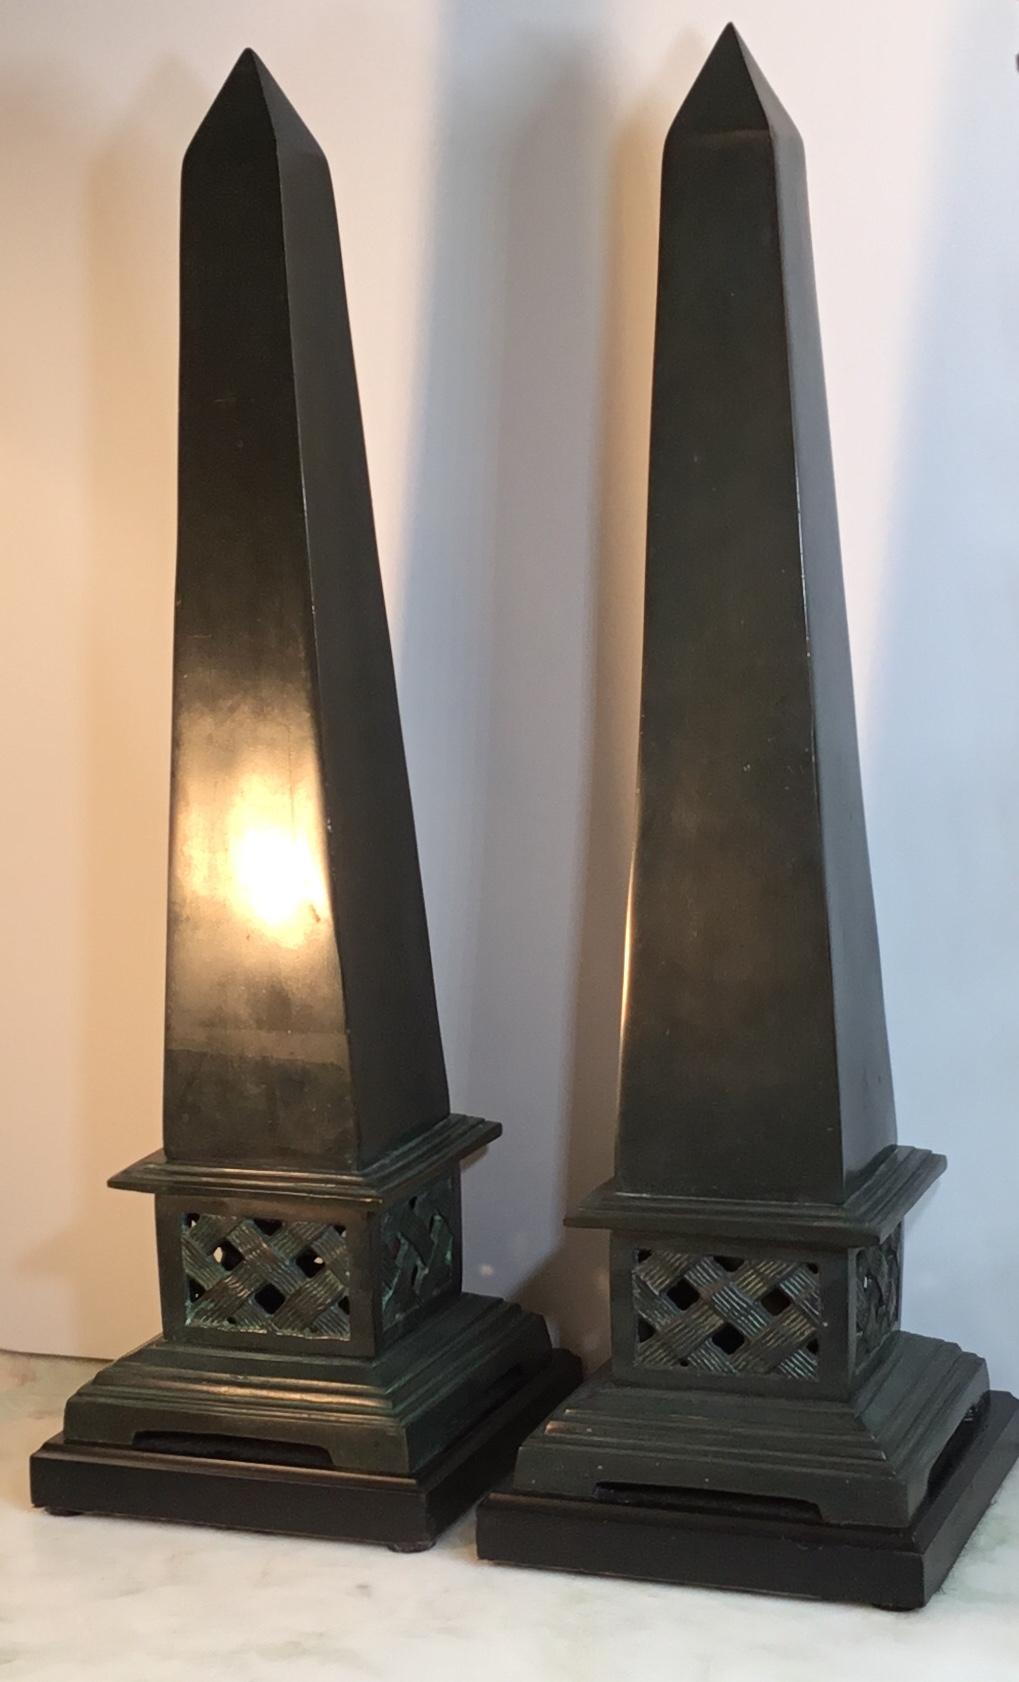 Elegant pair of obelisk made of solid bronze in dark green color, mounted on a black color brass base, beautiful object of art for display.